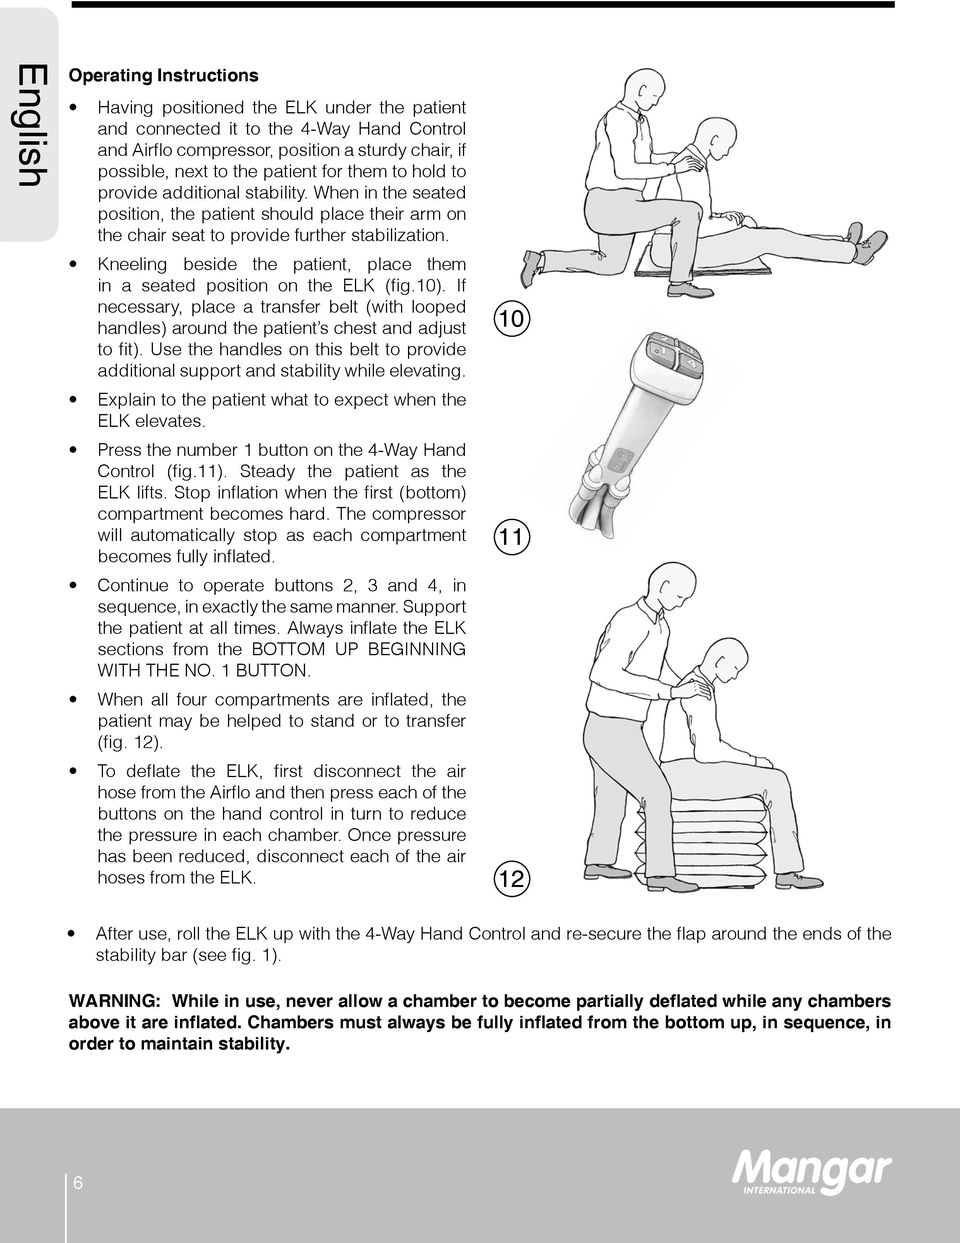 Kneeling beside the patient, place them in a seated position on the ELK (fig.10). If necessary, place a transfer belt (with looped handles) around the patient s chest and adjust to fit).